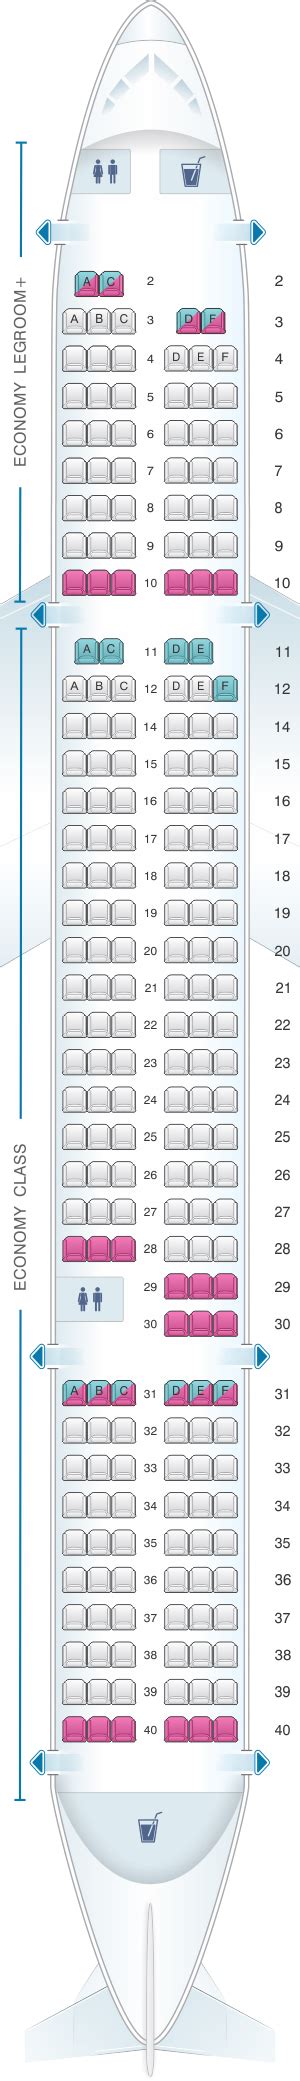 Allegiant Airline Seating Chart